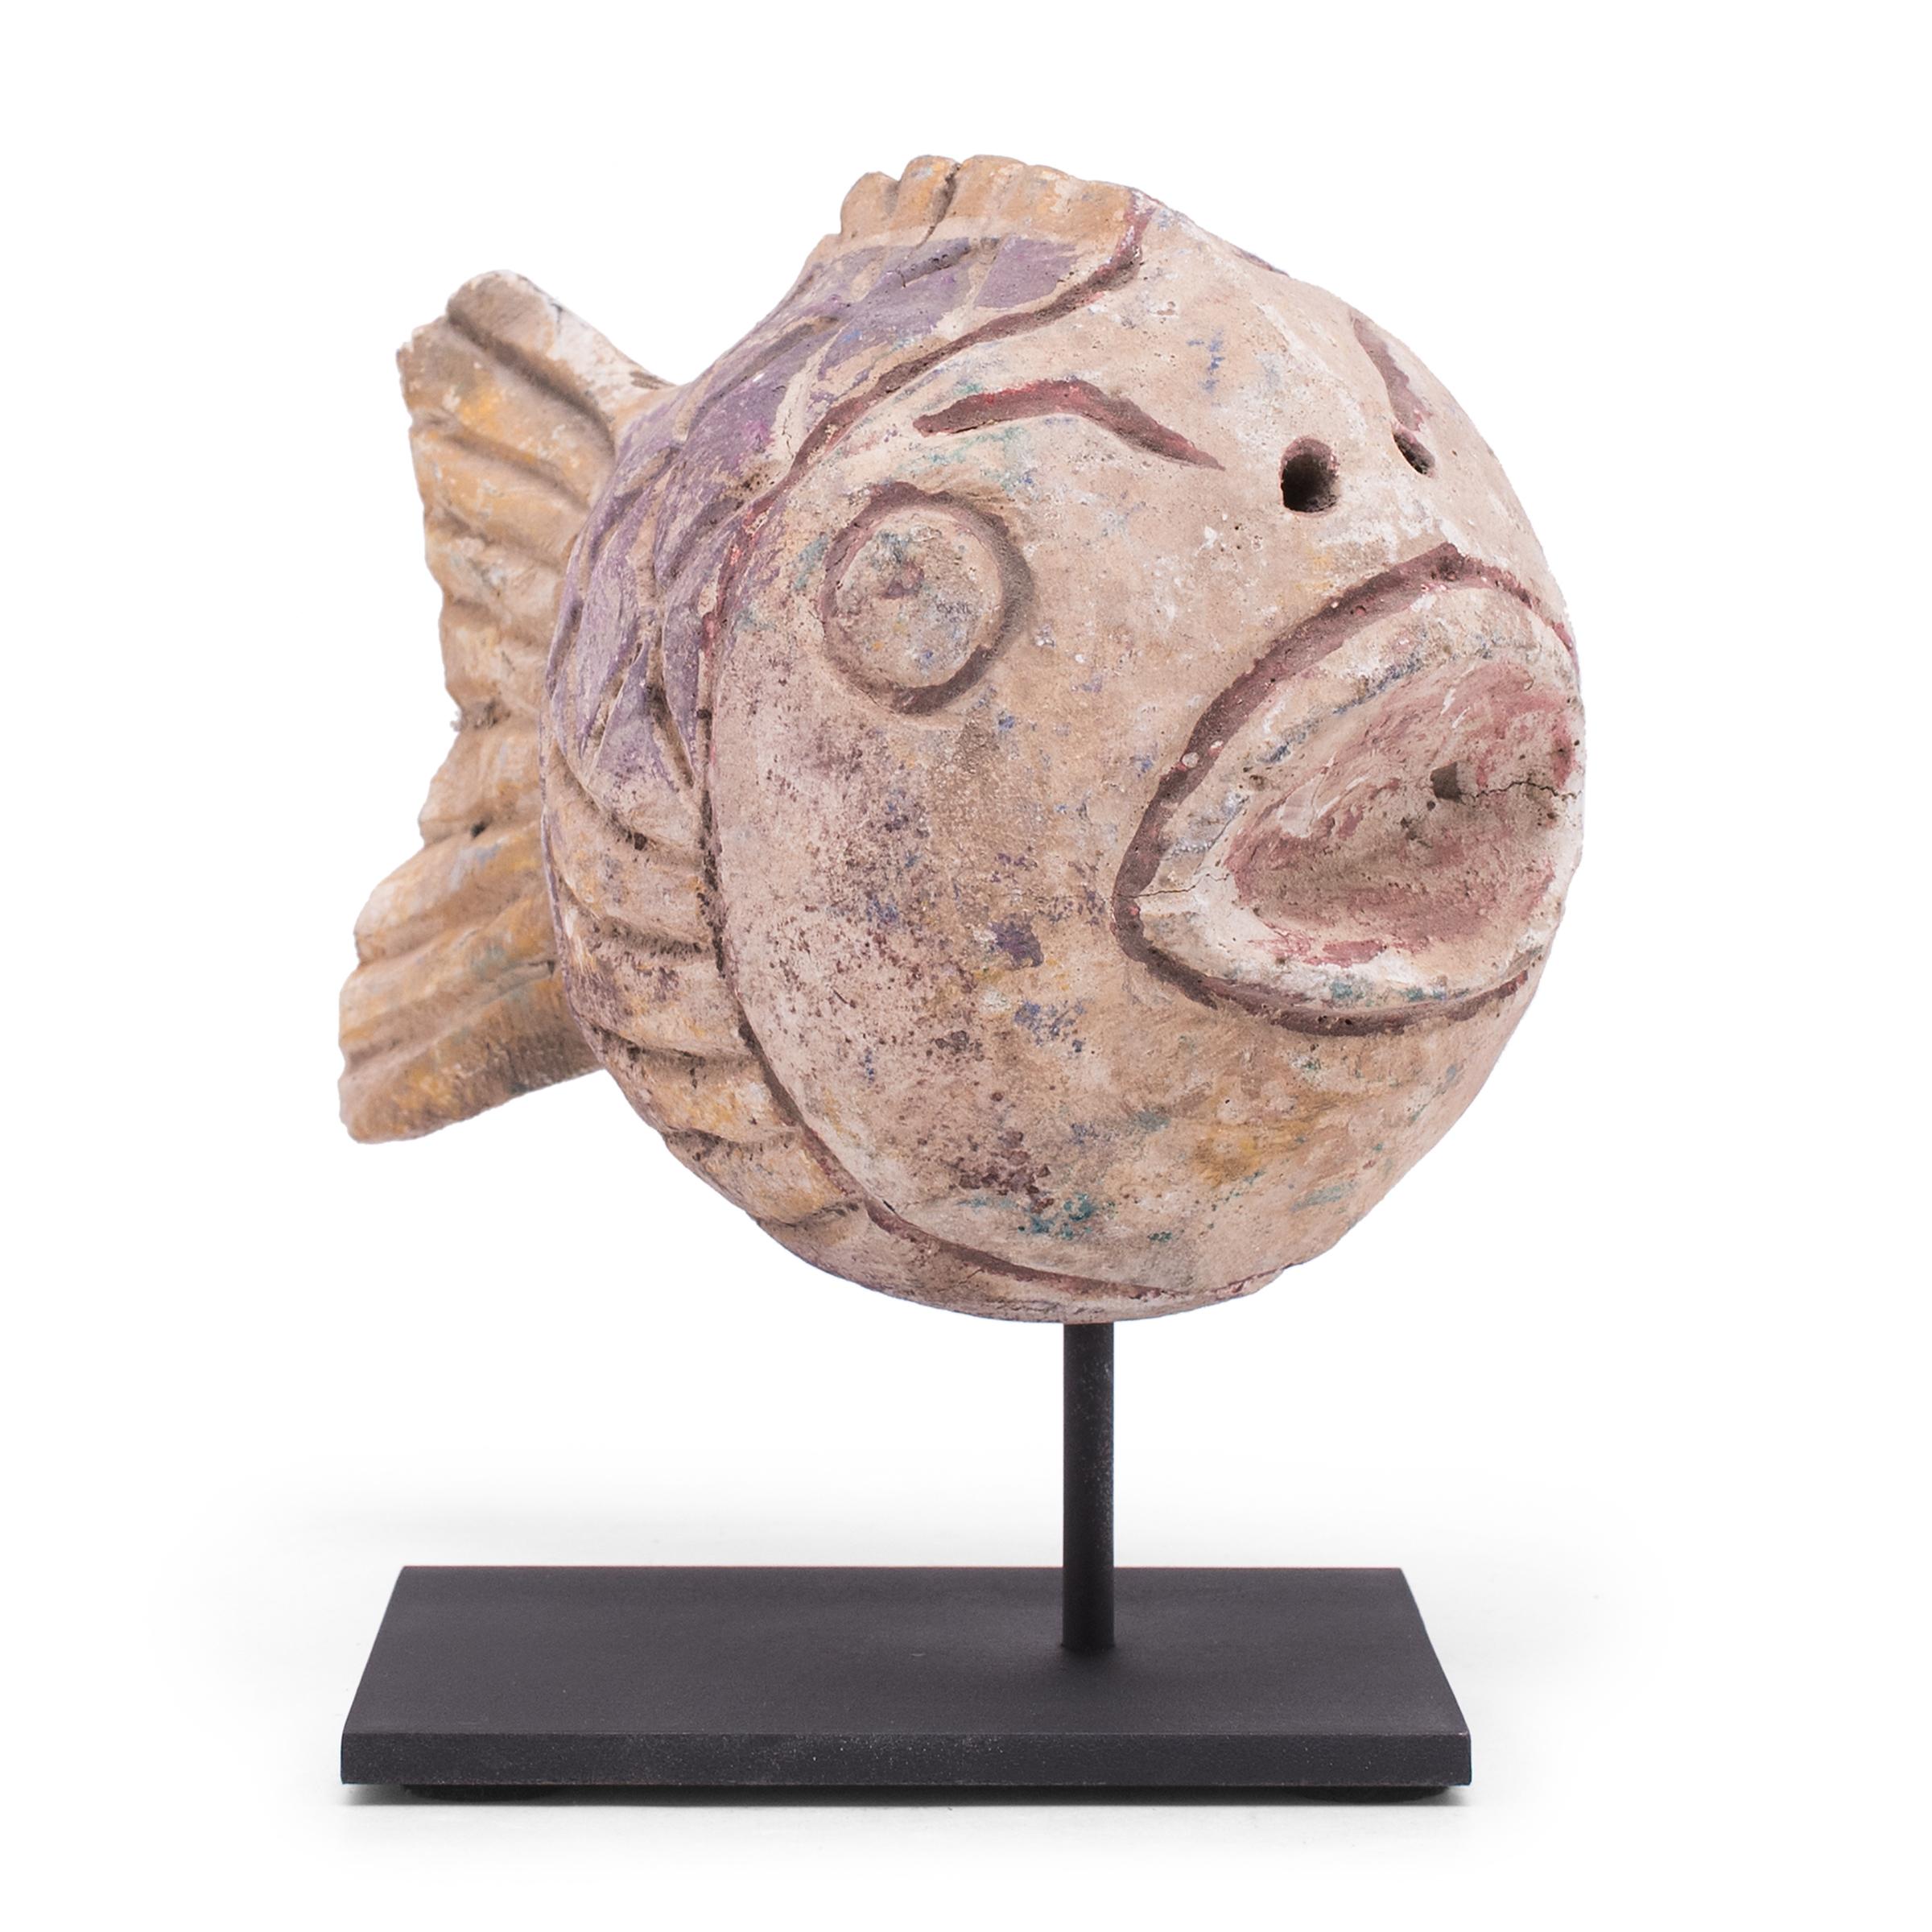 Hand-carved from reclaimed wood, this rustic fish sculpture recreates early 20th-century Chinese folk art designs. The fish is painted with a colorful palette of purple, red and yellow and finished with a beautifully worn texture. Common motifs in